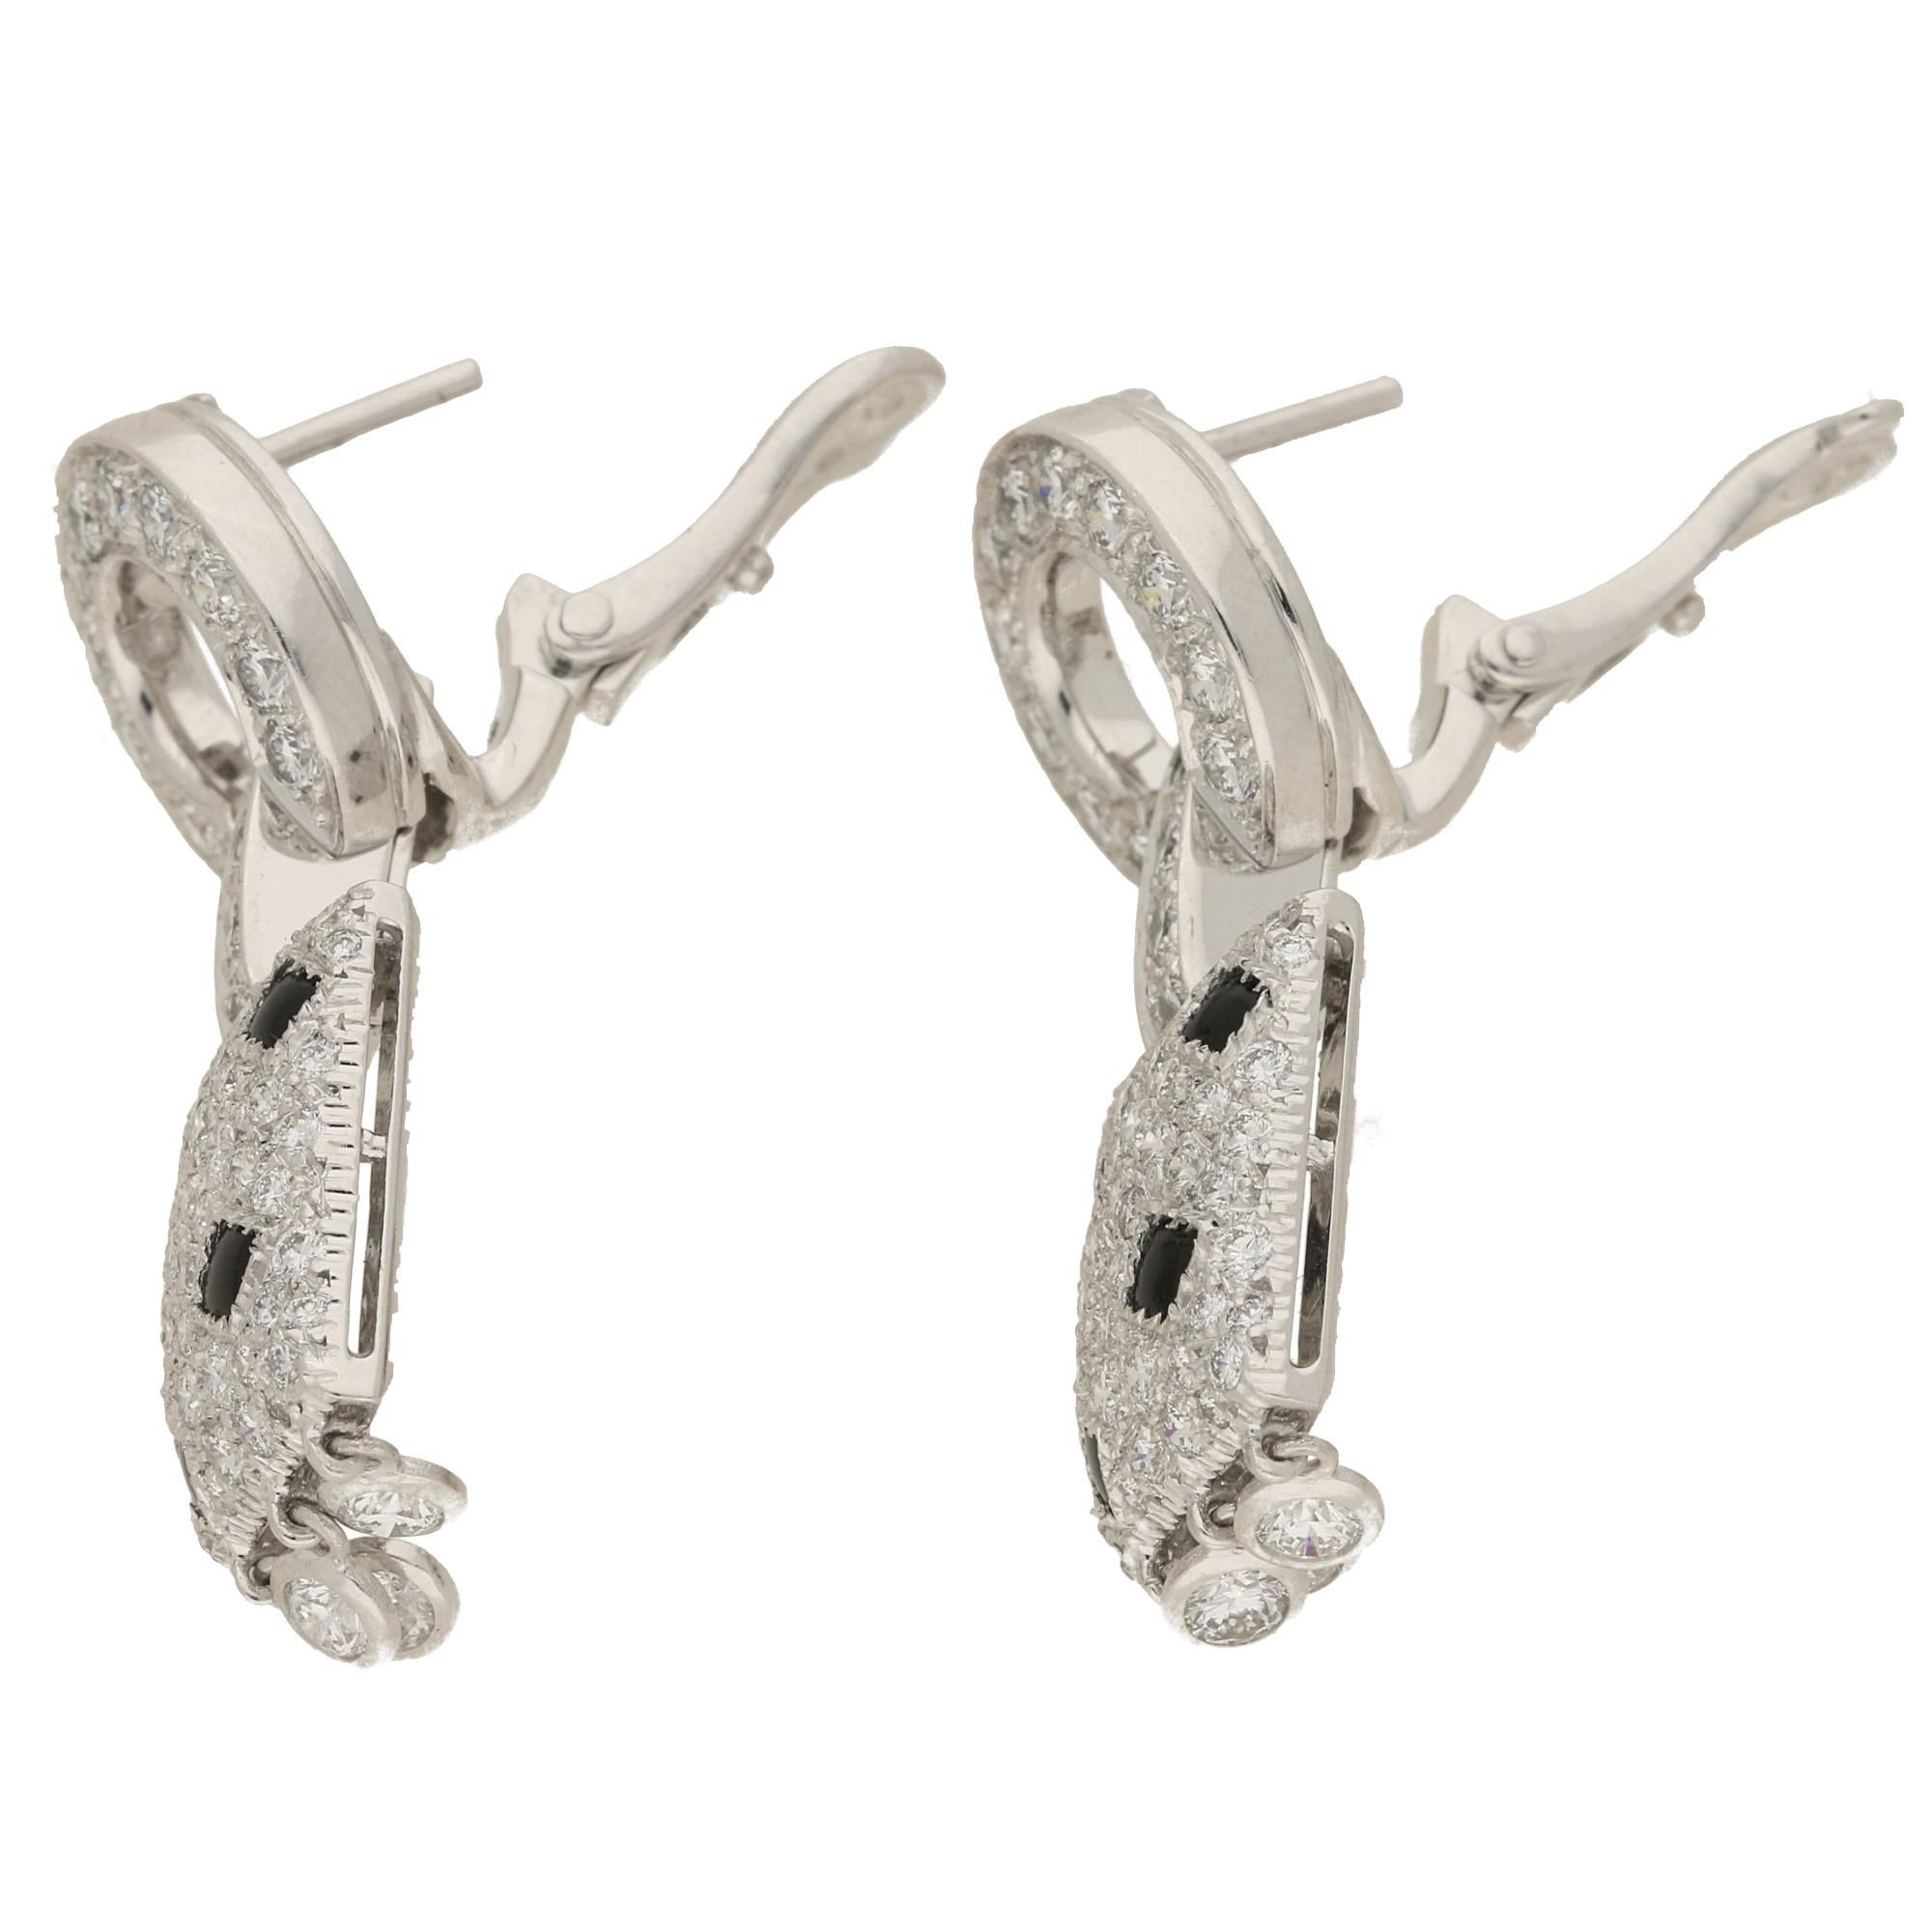 A spectacular pair of signed Cartier Pelage plaque earrings set in 18k white gold. Each earring is of a geometric design, set with round brilliant-cut diamonds and cabochon onyx studs. The plaques supports a fringe of collet-set brilliant-cut